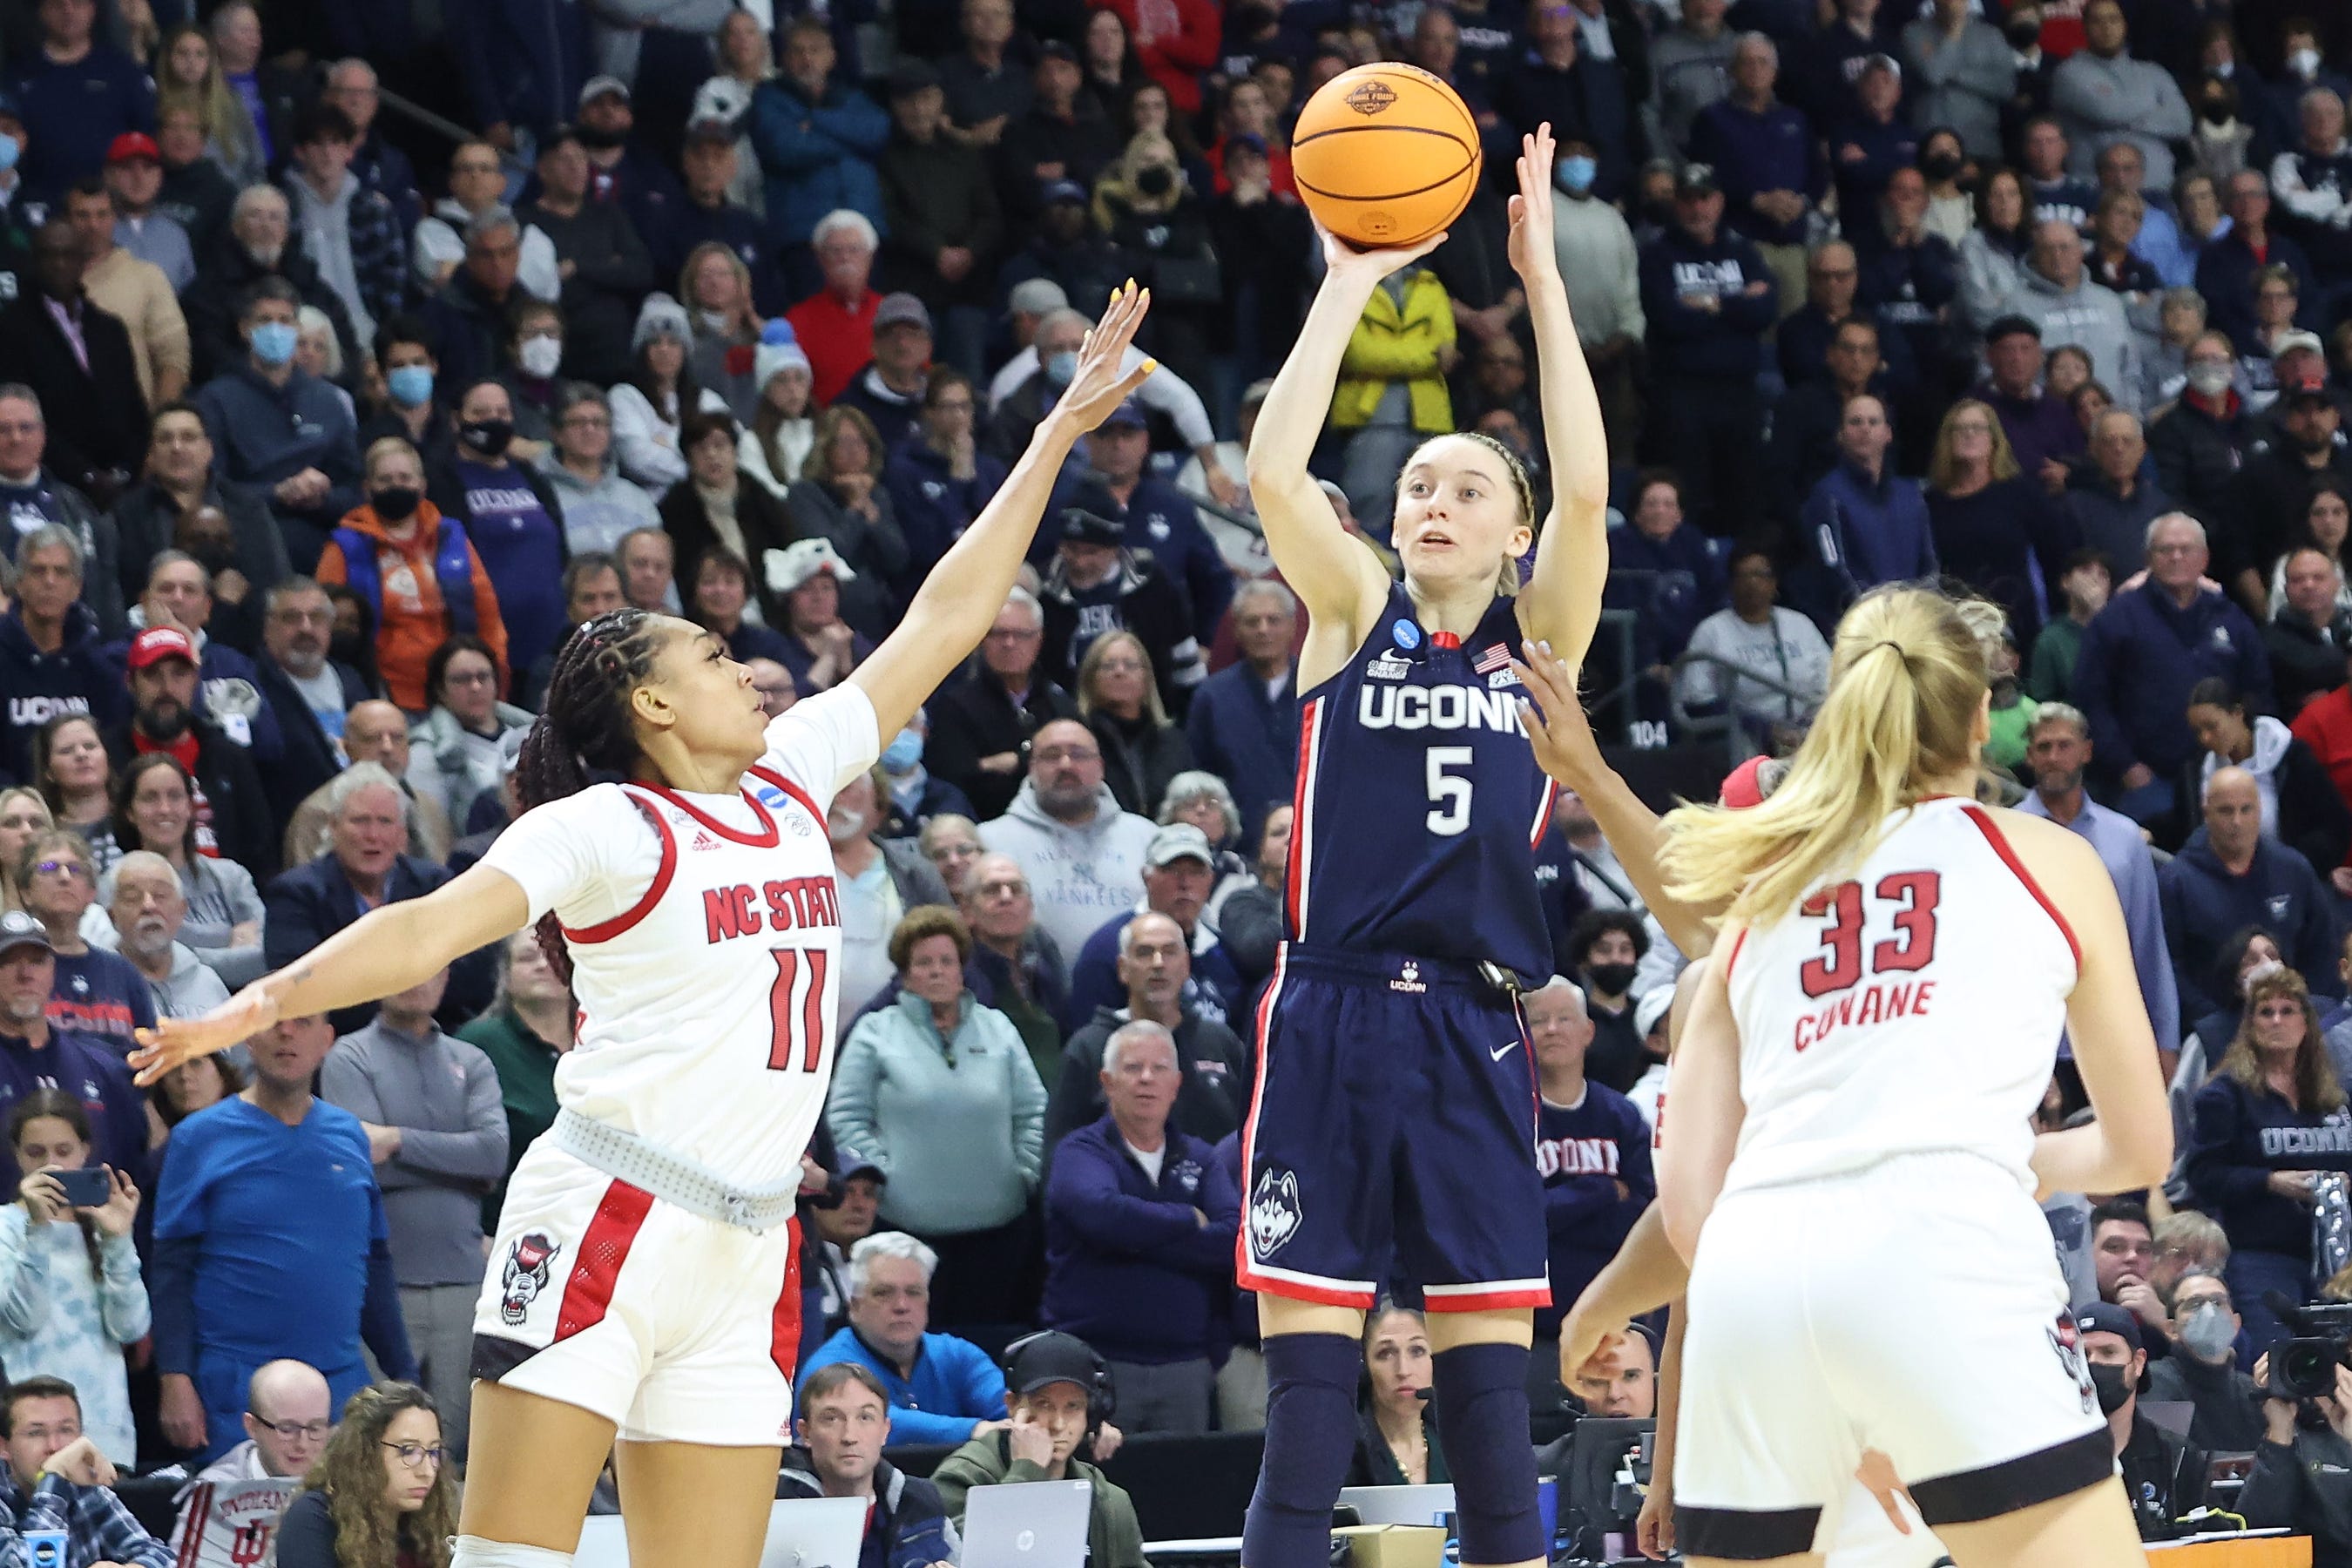 UConn's Paige Bueckers out six to eight weeks with knee injury